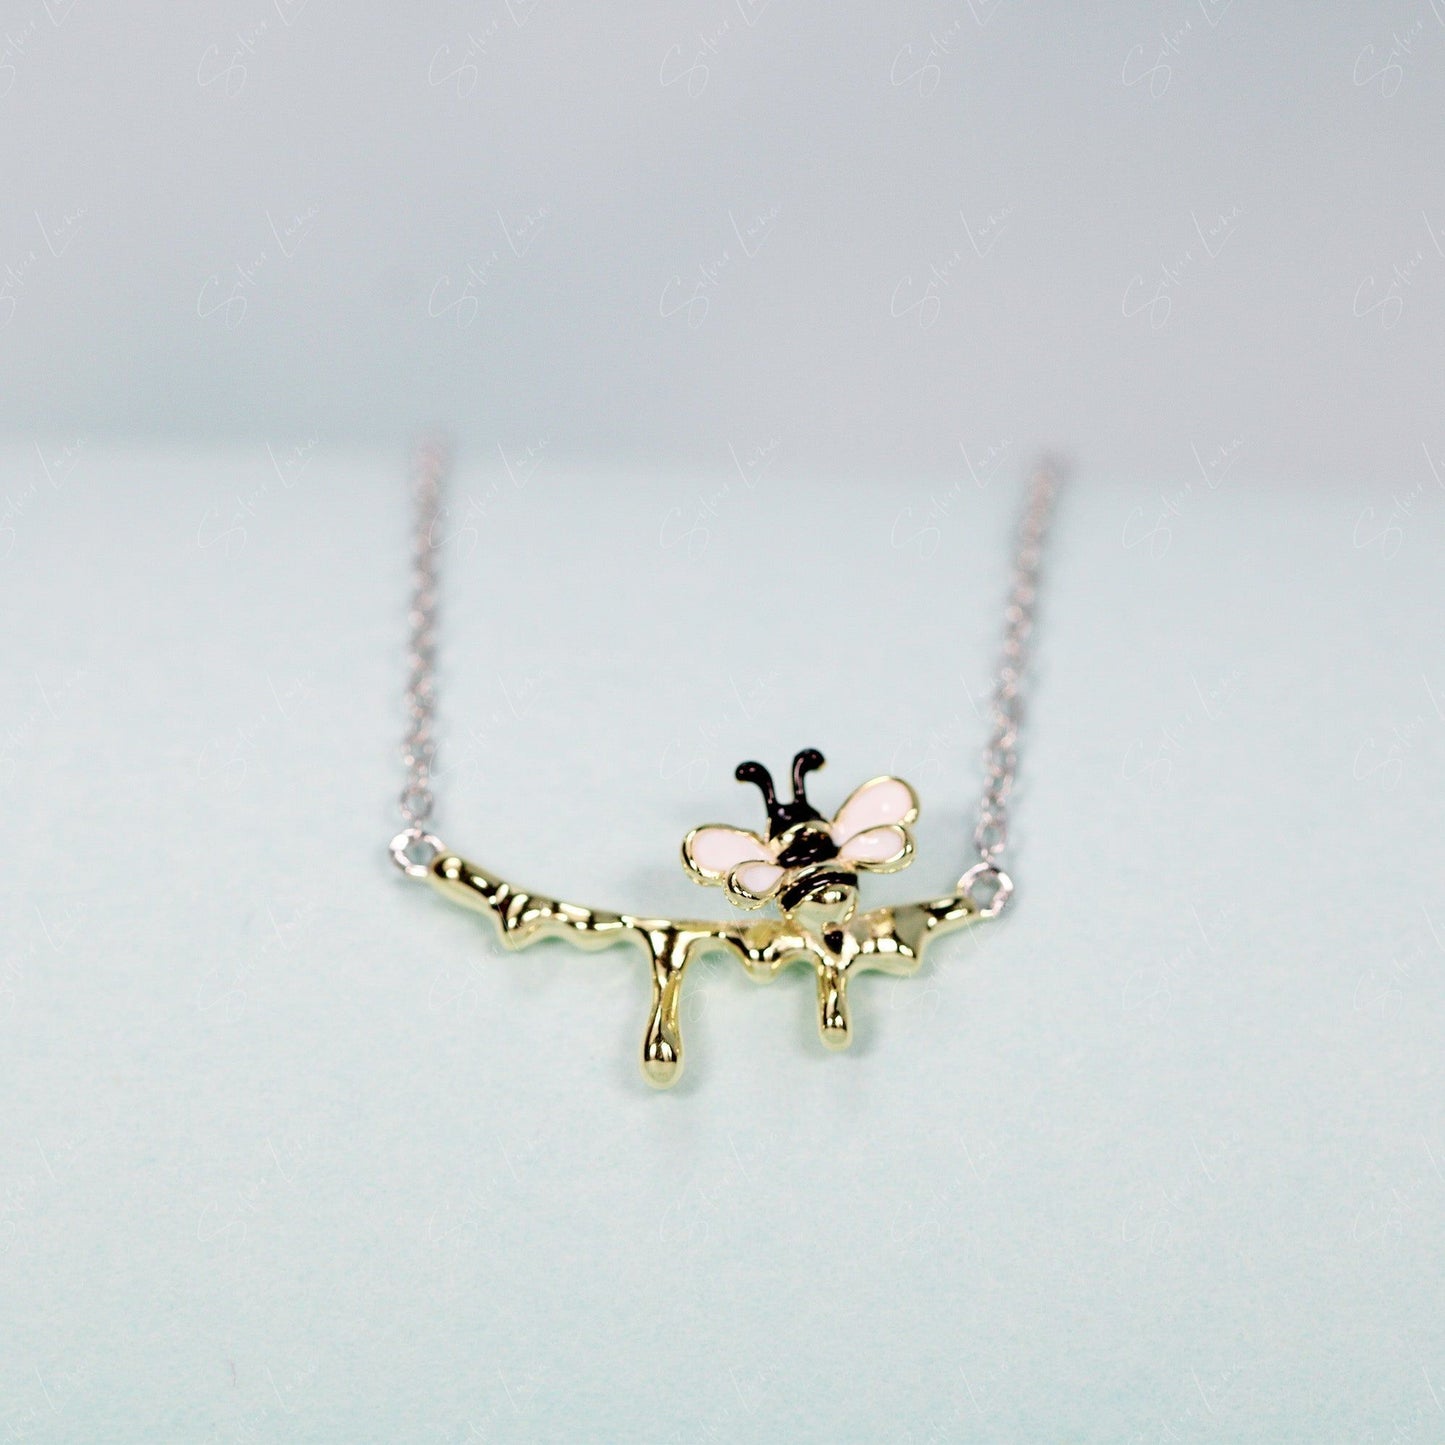 melting bee pendant necklace